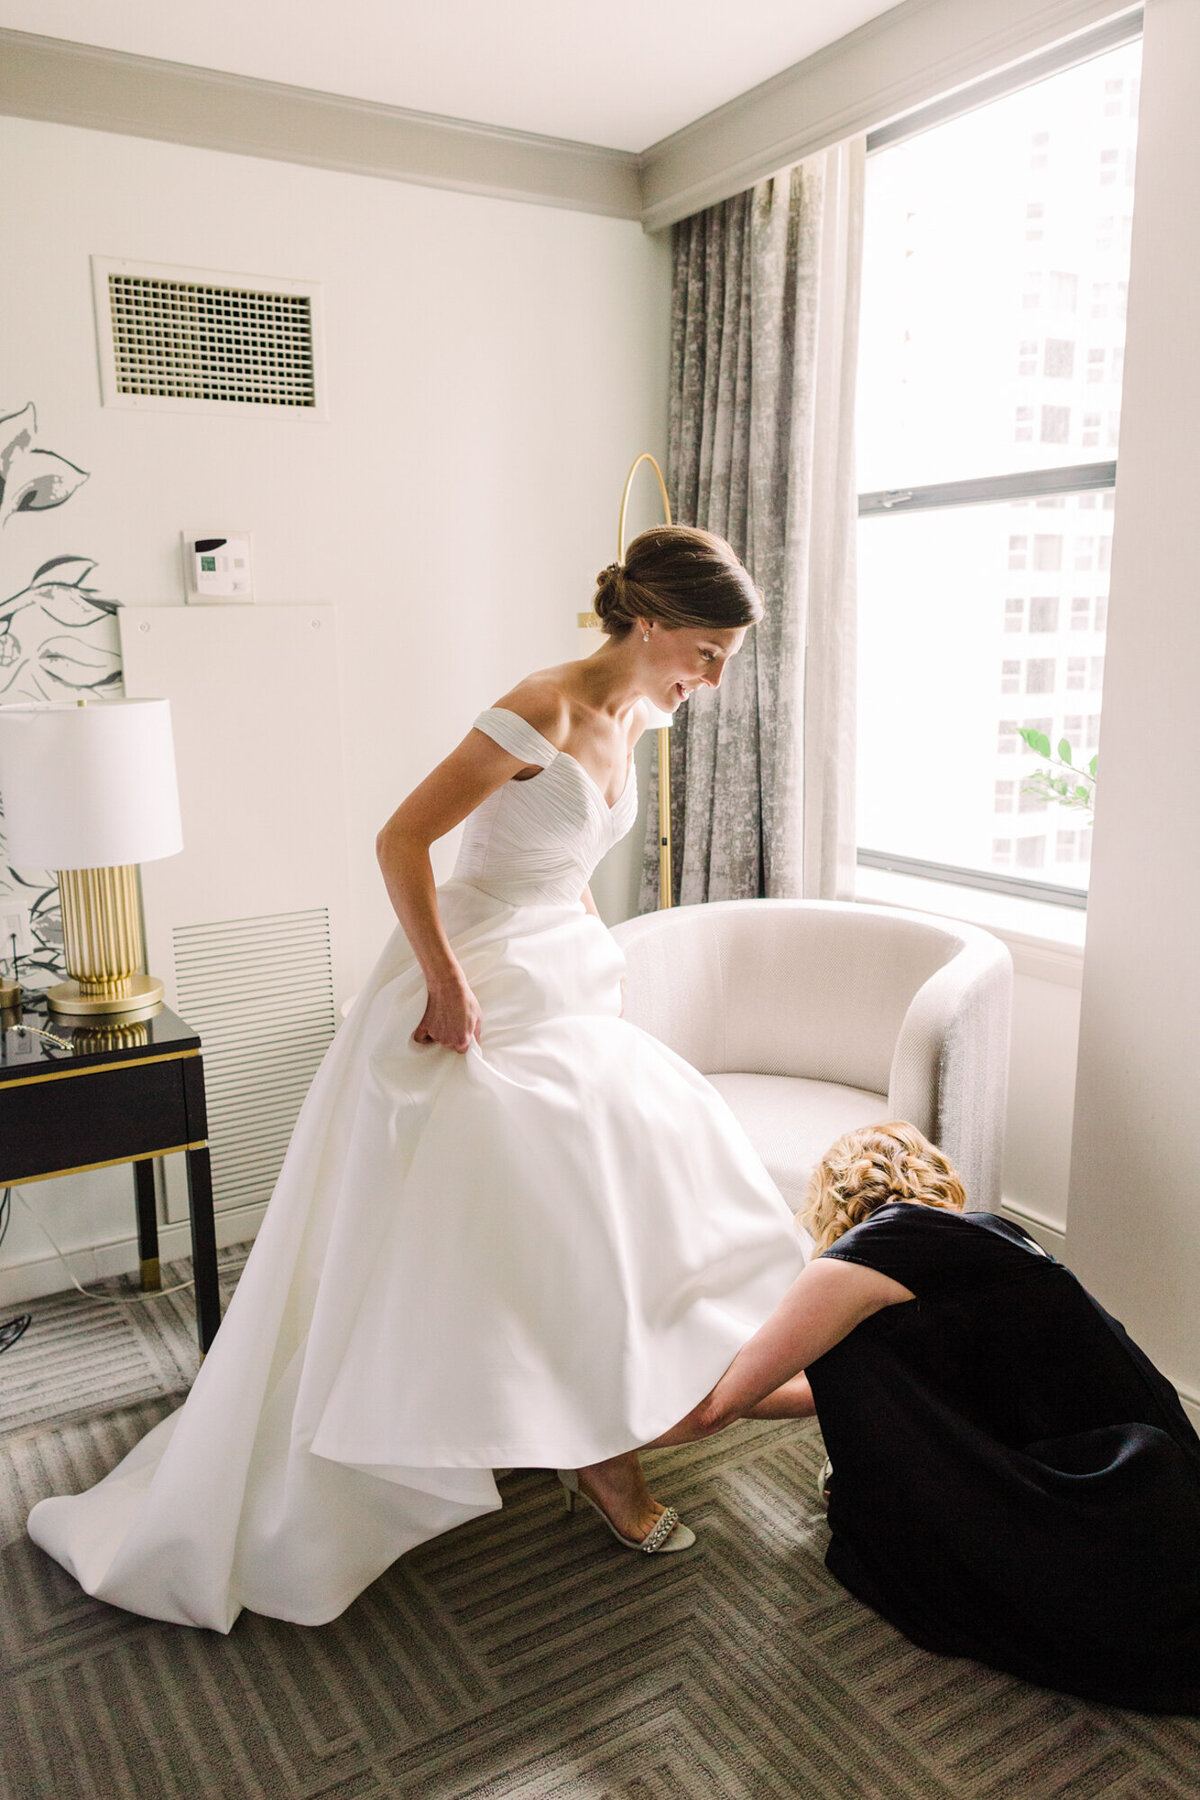 A bride gets ready on her wedding day